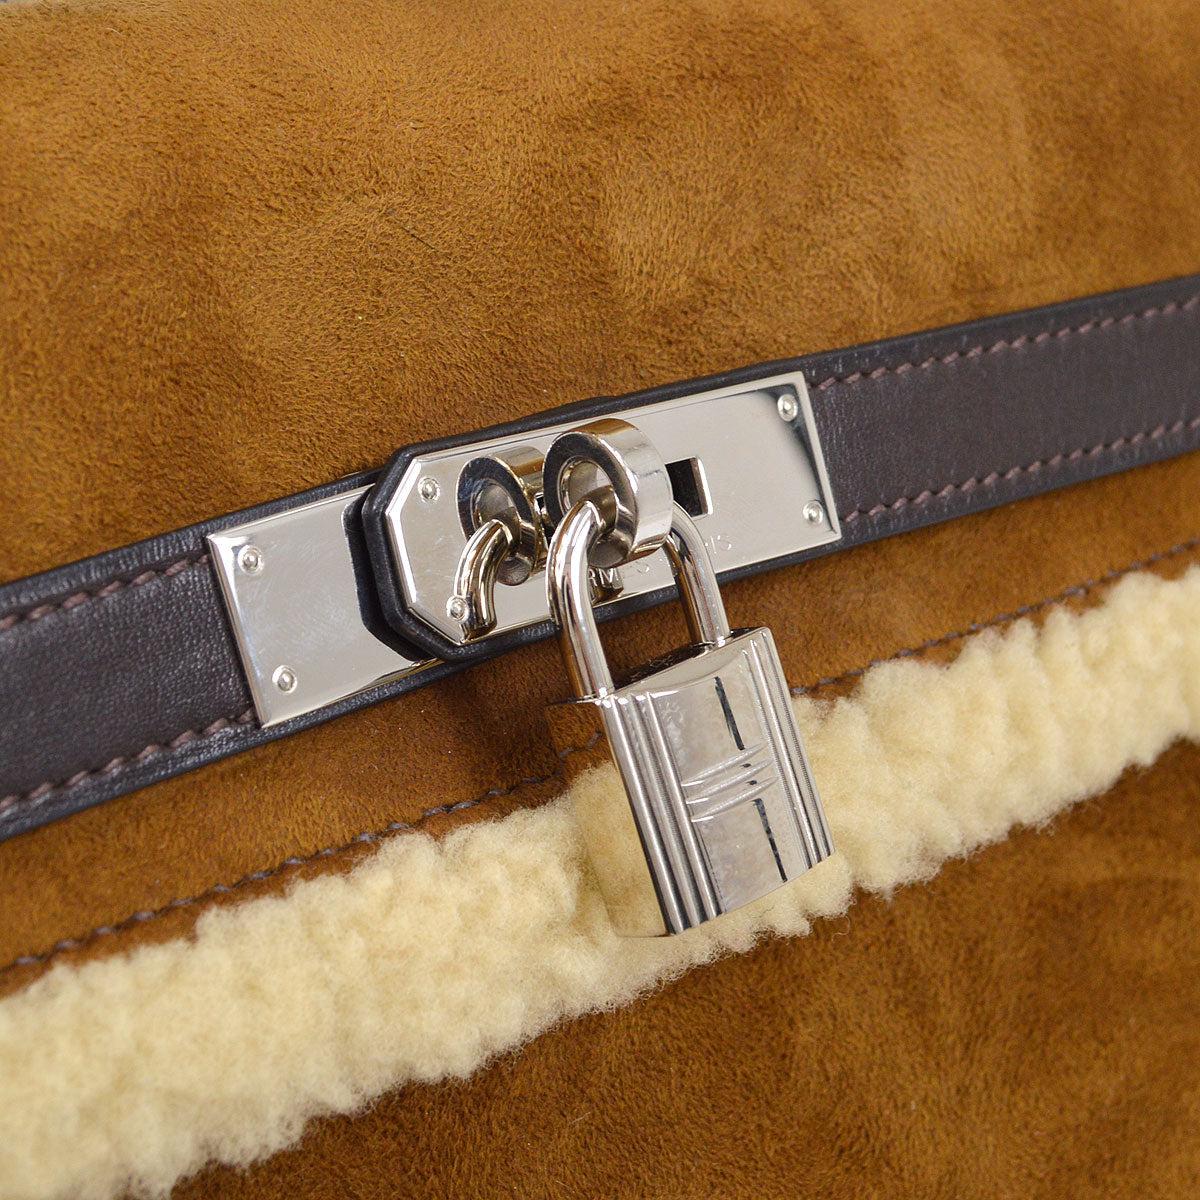 Pre-Owned Vintage Condition
From 2006 Collection
Suede
Shearling
Barenia Leather
Measures 14.25